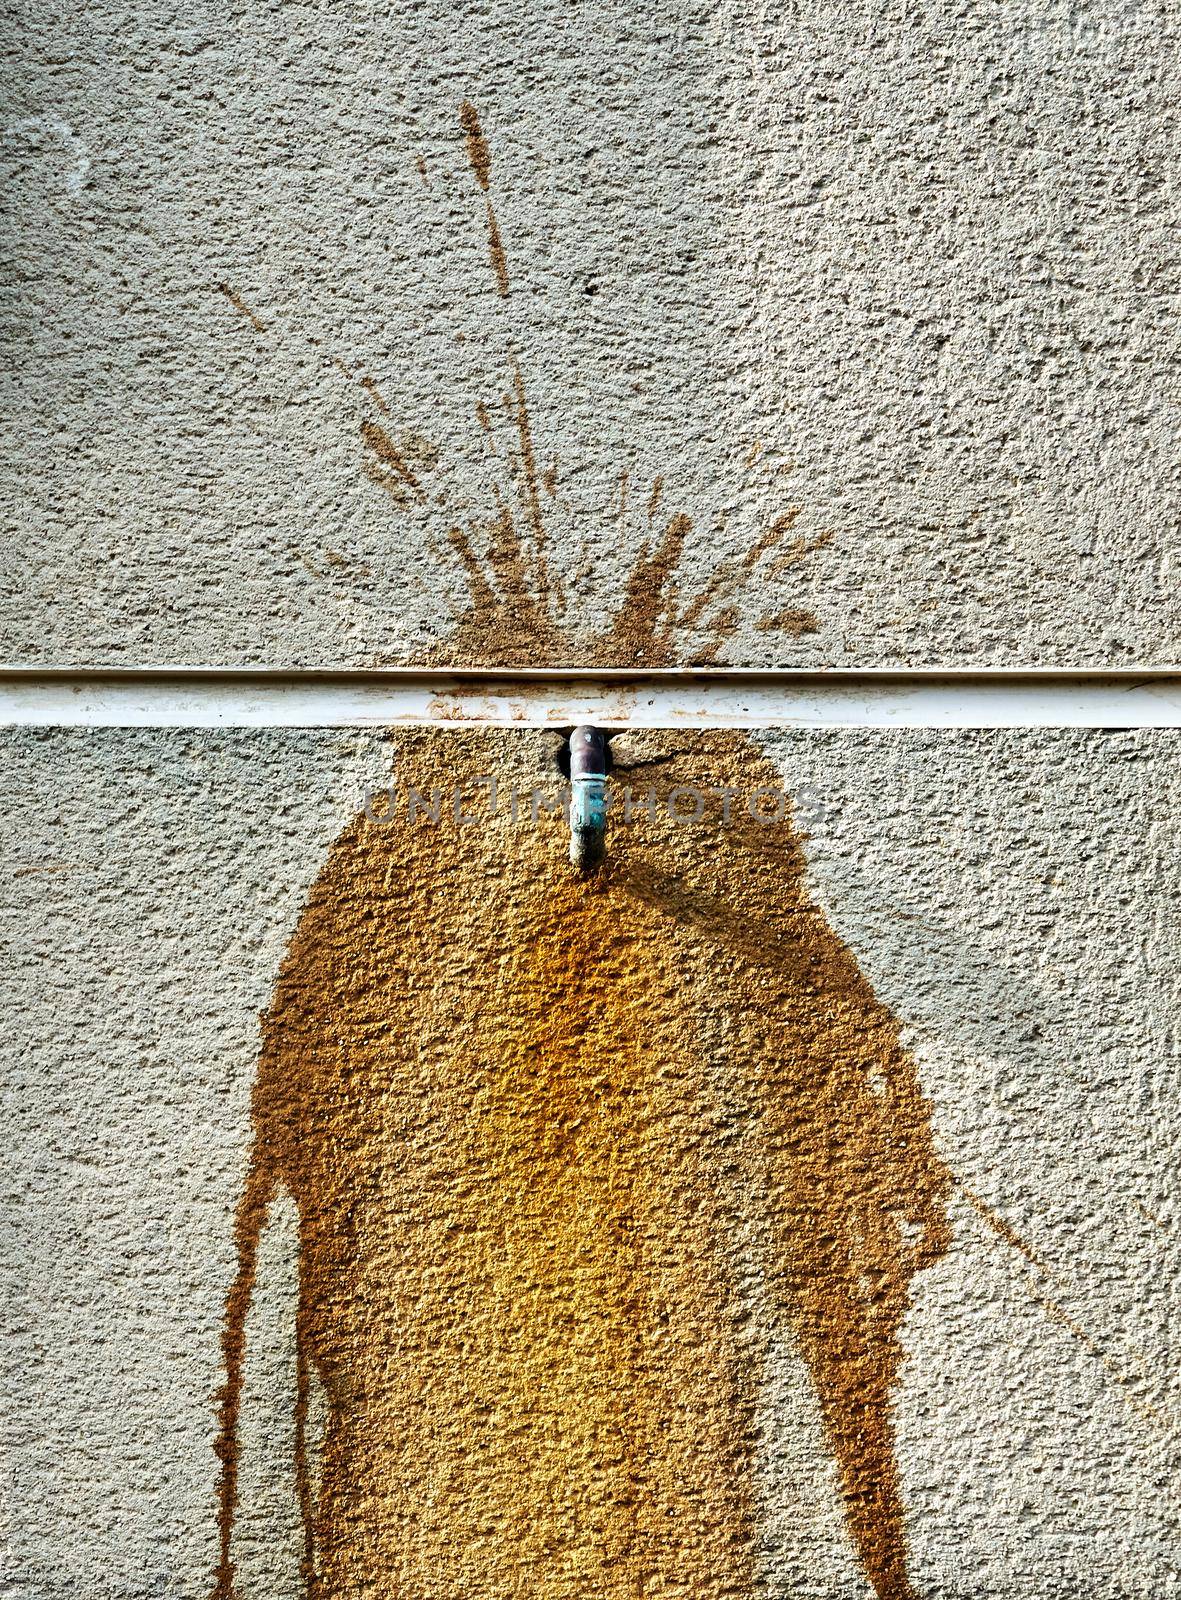 Orange and brown streaks of rust on a concrete wall